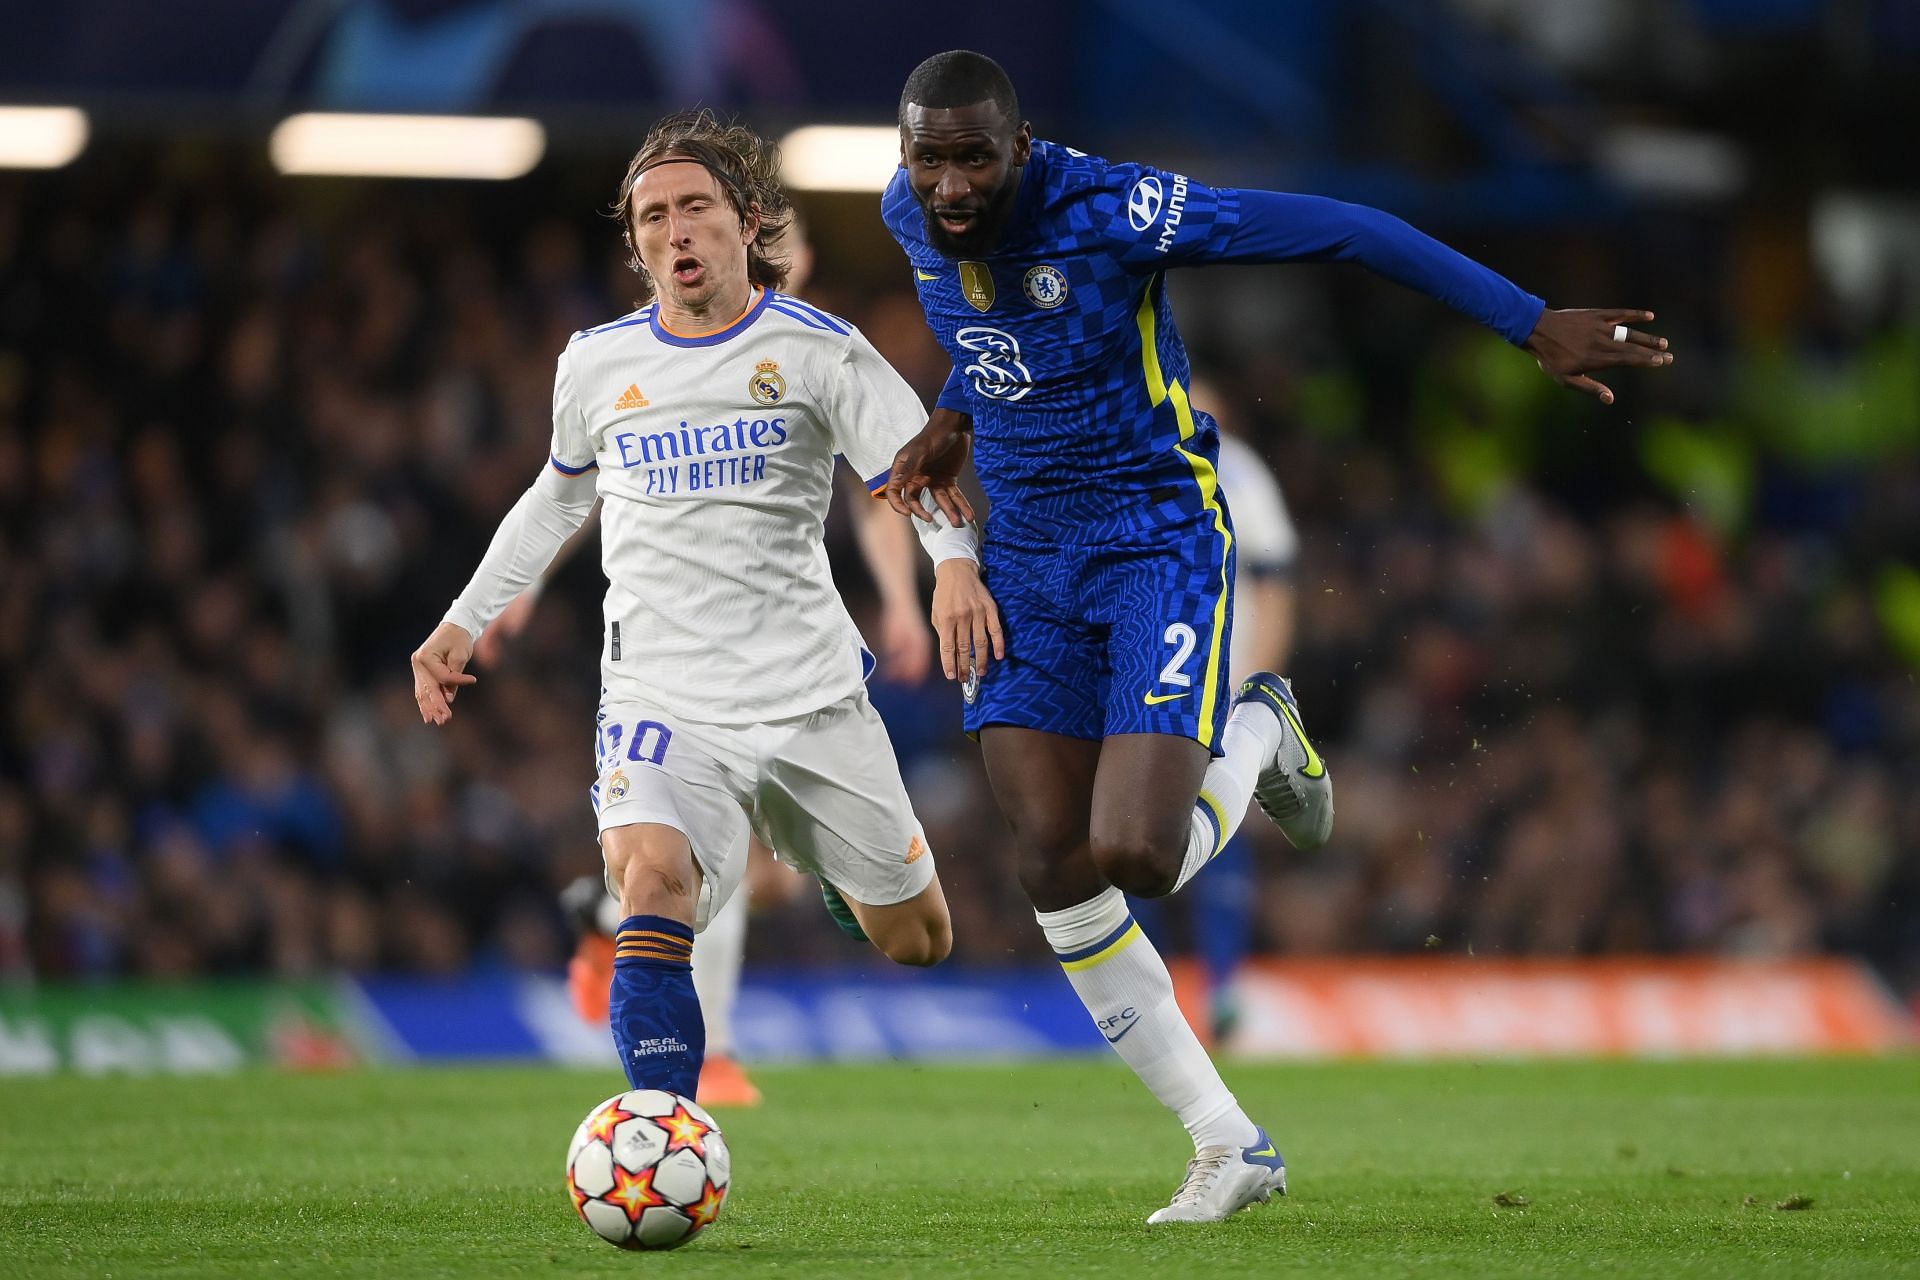 Chelsea do battle with Madrid in the second-leg of their Champions League quarter final